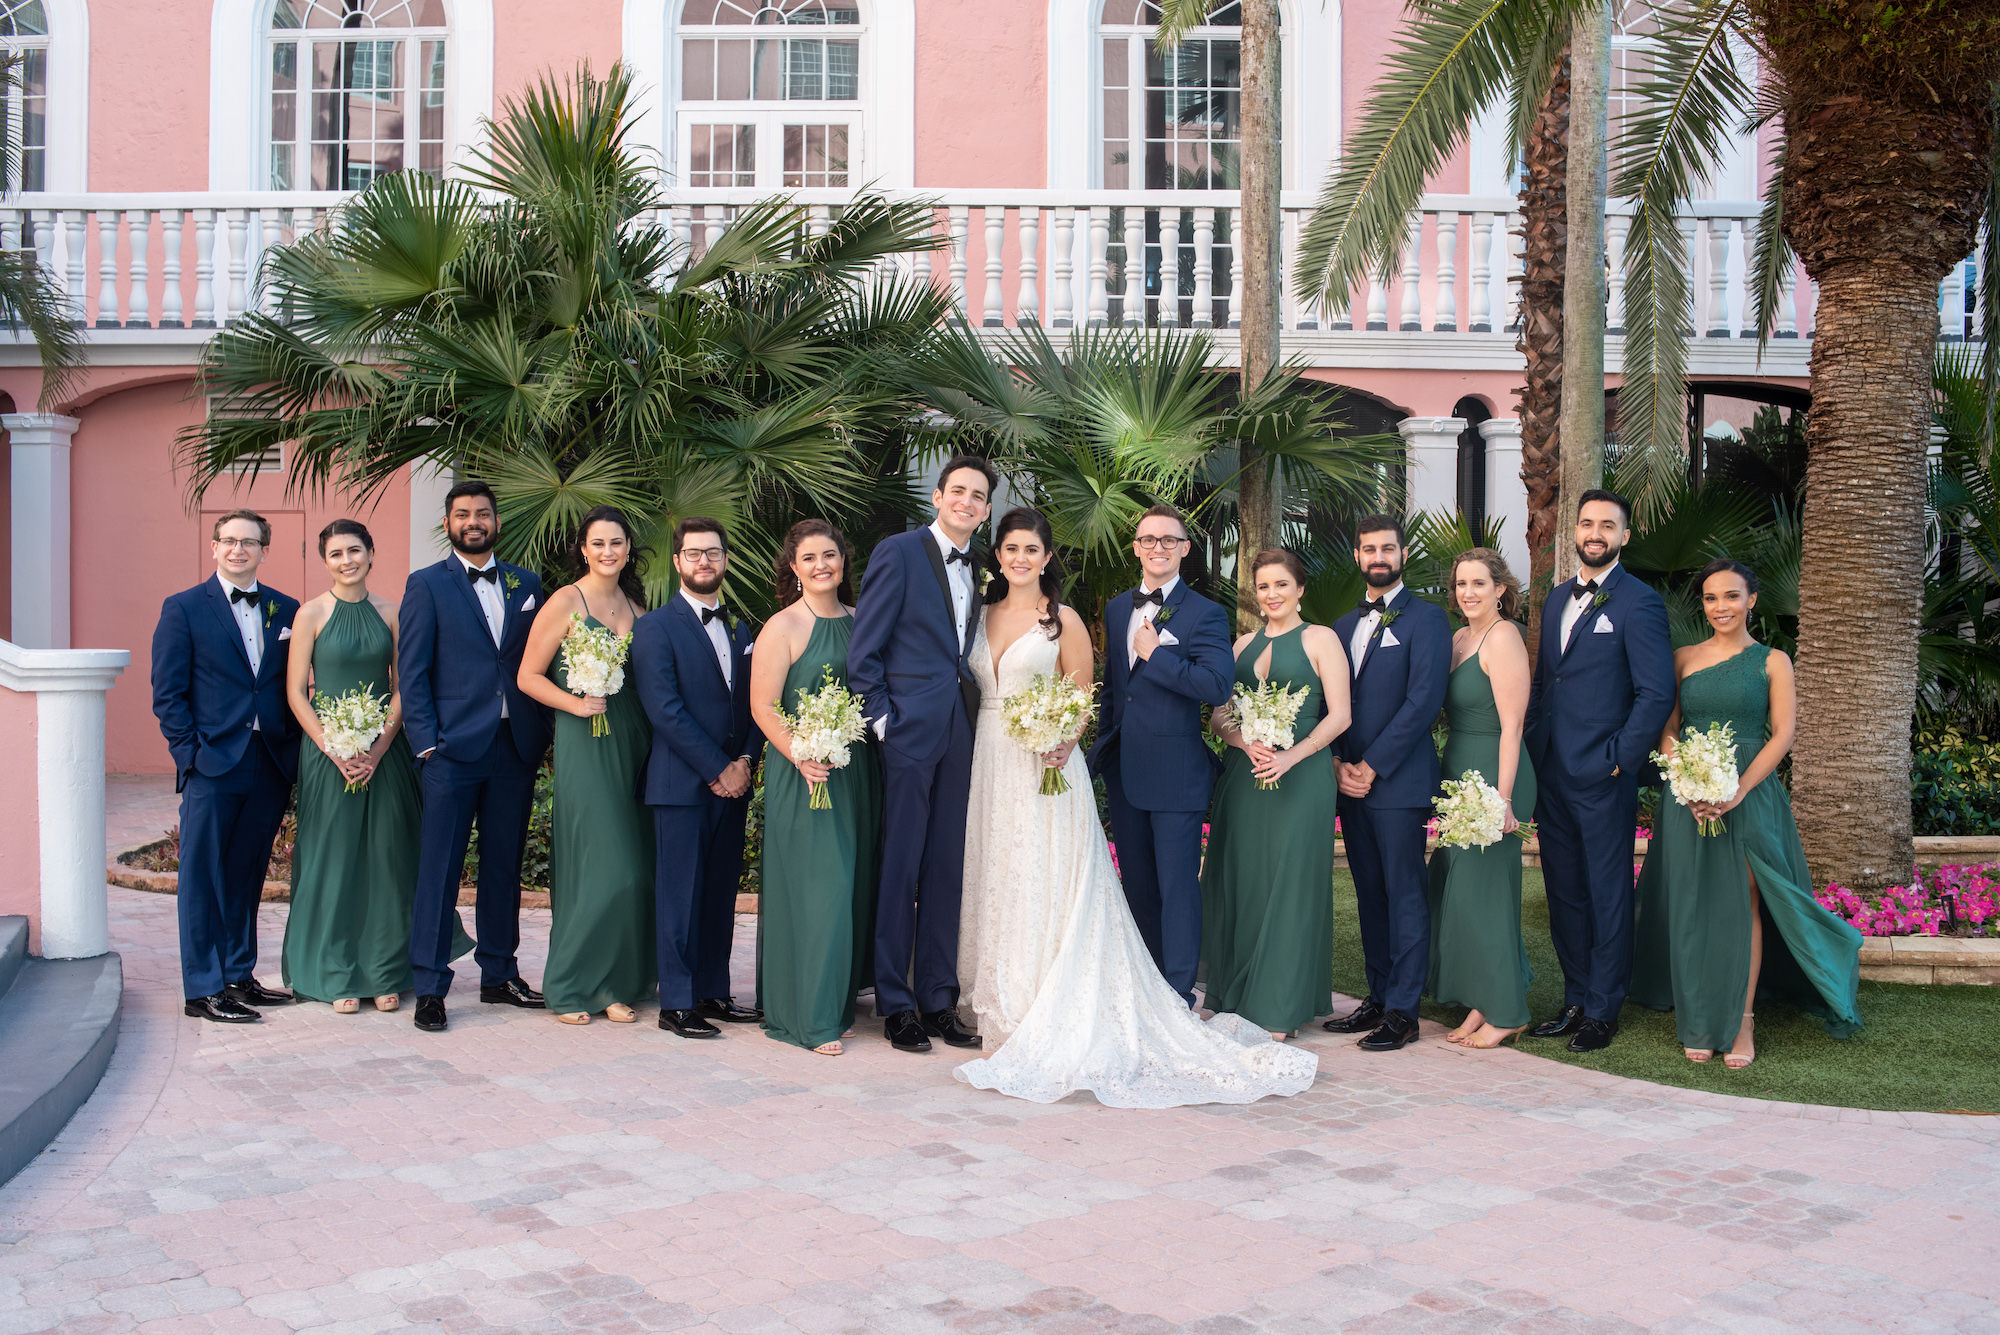 Classic Florida Bride in Lace Paloma Blanca Wedding Dress, Groom and Groomsmen in Navy Blue Suits with Bowties, Bridesmaids in Dark Green Azazie Mix and Match Dresses Holding Ivory Floral Bouquets Wedding Party Portrait | St. Petersburg Waterfront Wedding Venue The Don CeSar | Historic Pink Palace | Tampa Bay Wedding Planner UNIQUE Weddings + Events